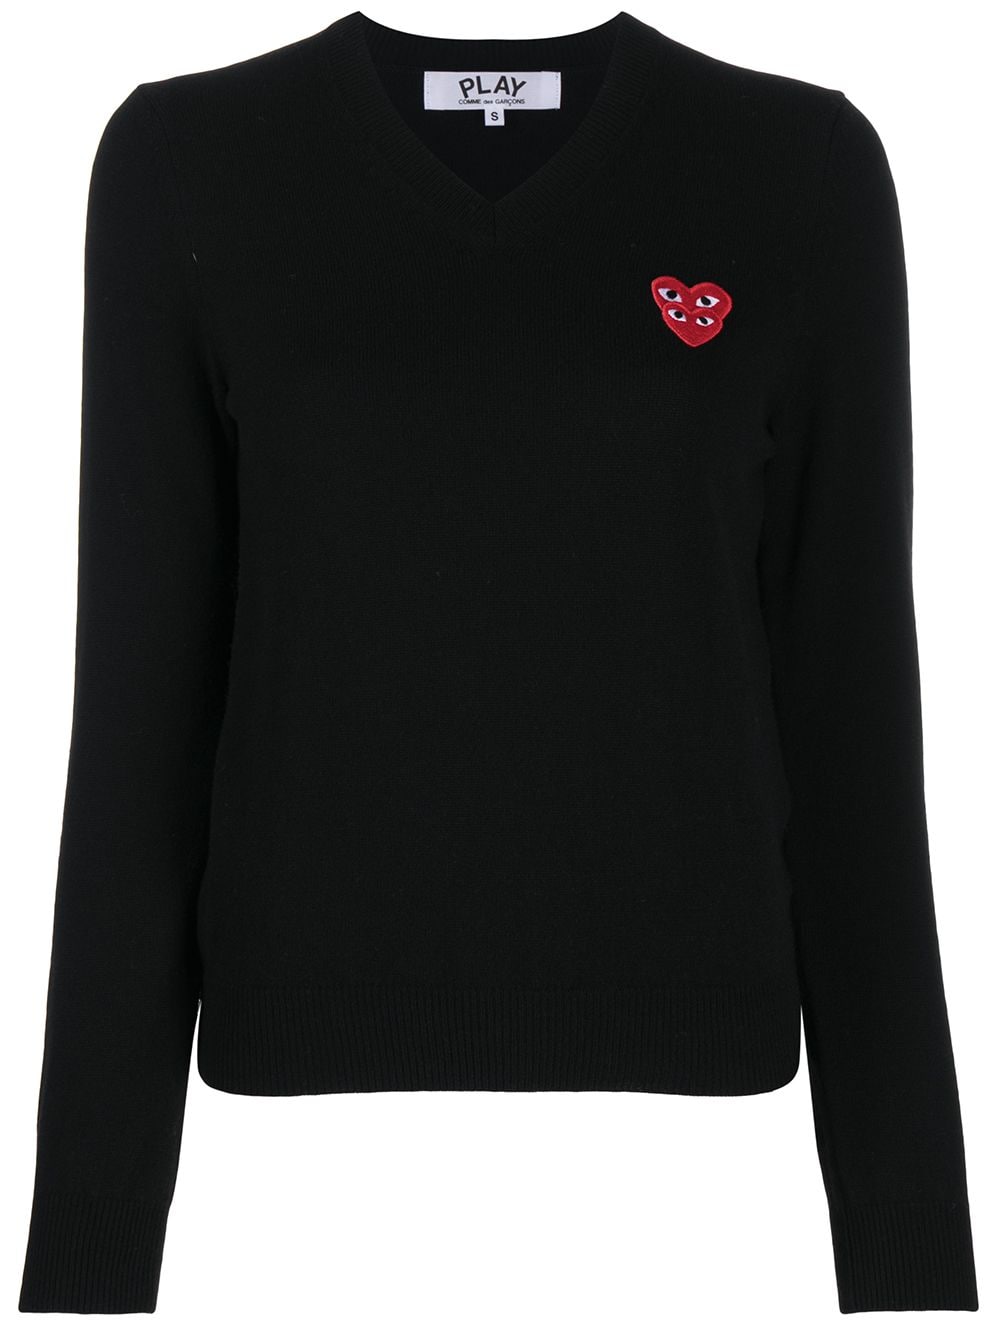 Image 1 of Comme Des Garçons Play V-neck overlapping heart top